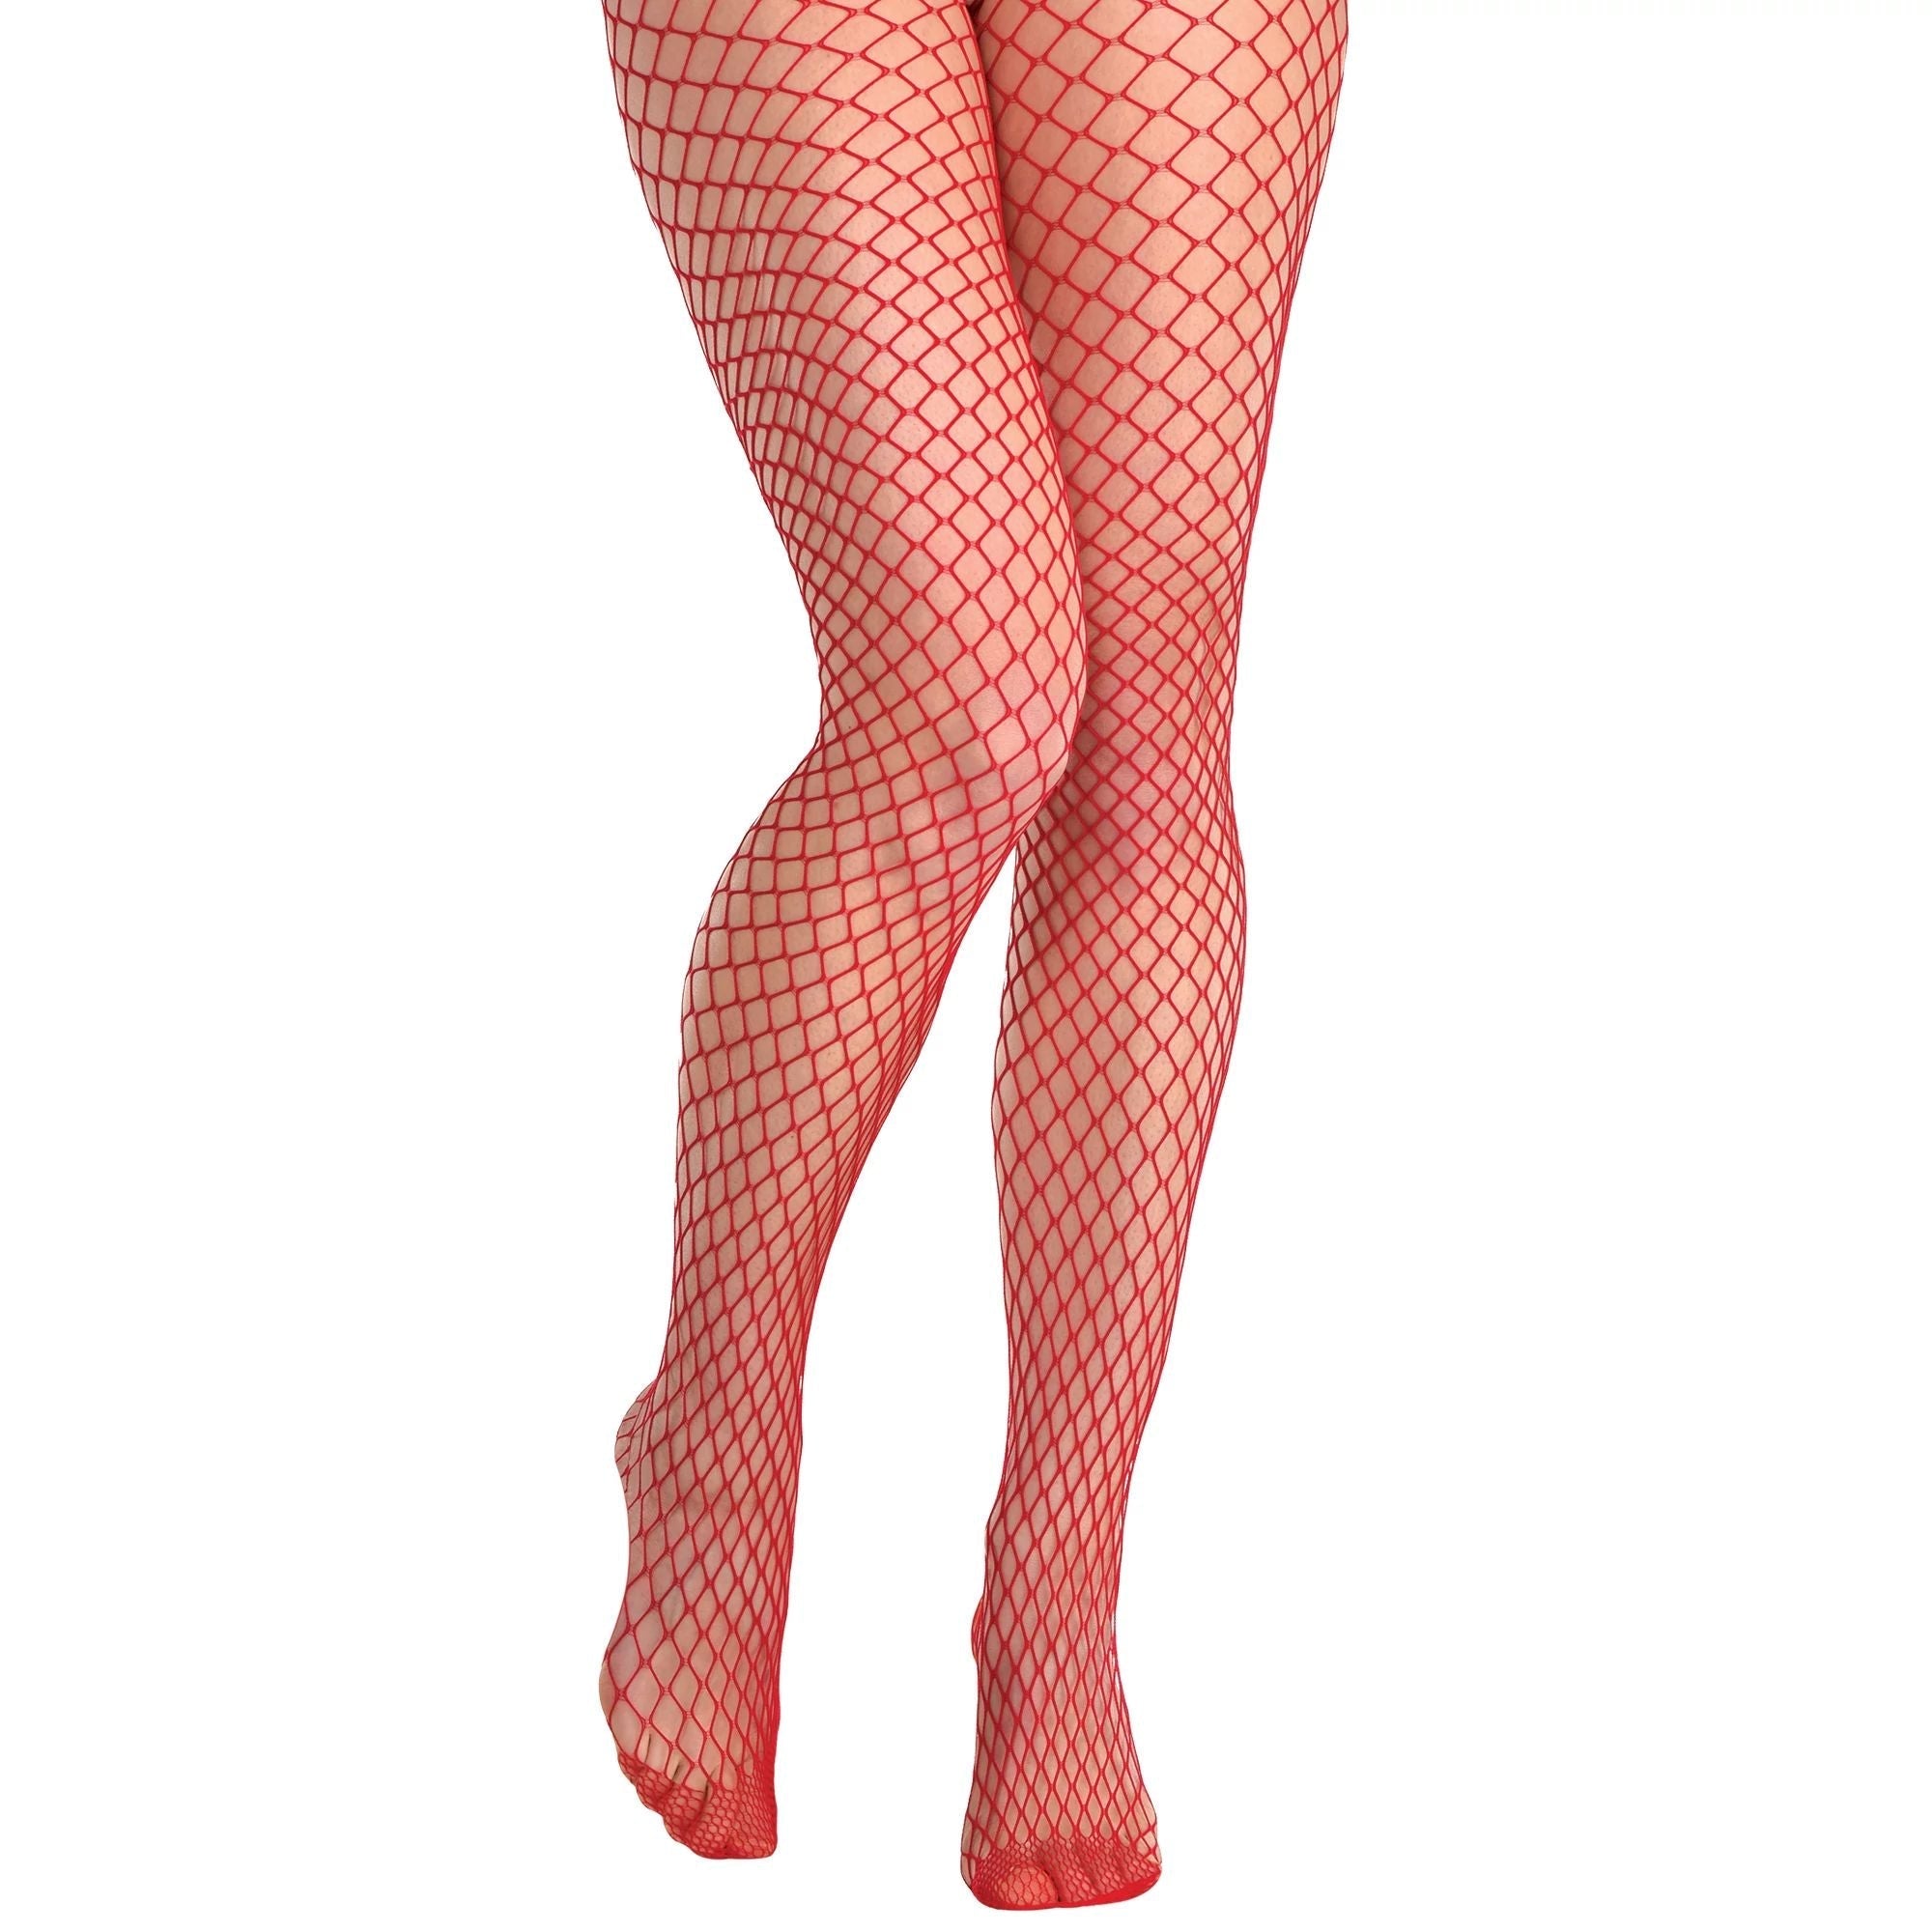 Amscan COSTUMES: ACCESSORIES Red Diamond Net Stockings